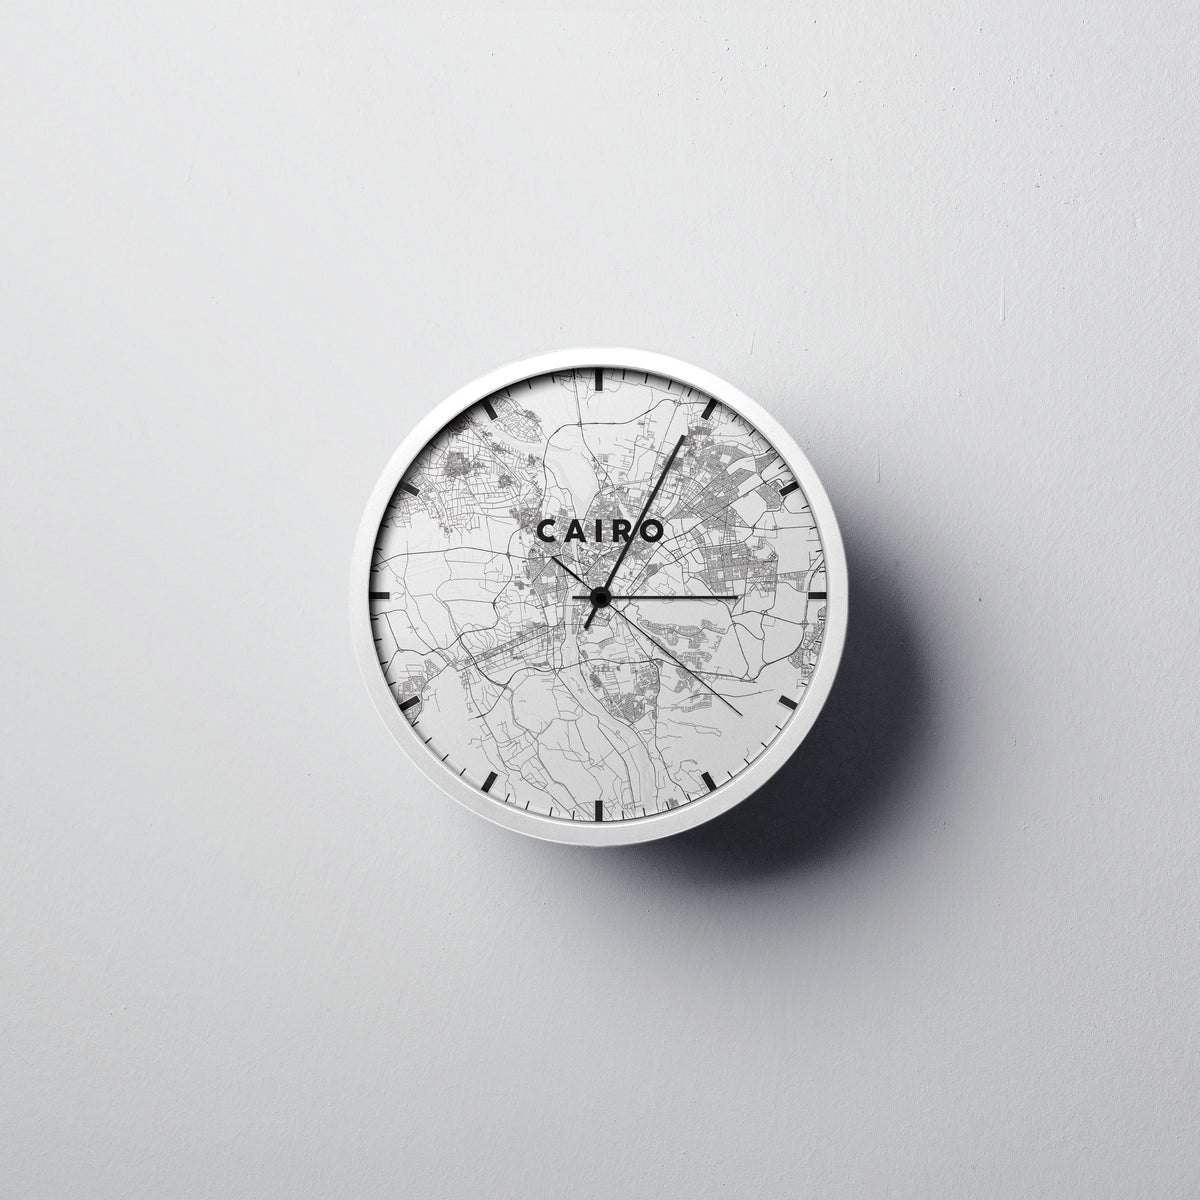 Cairo Wall Clock - Point Two Design